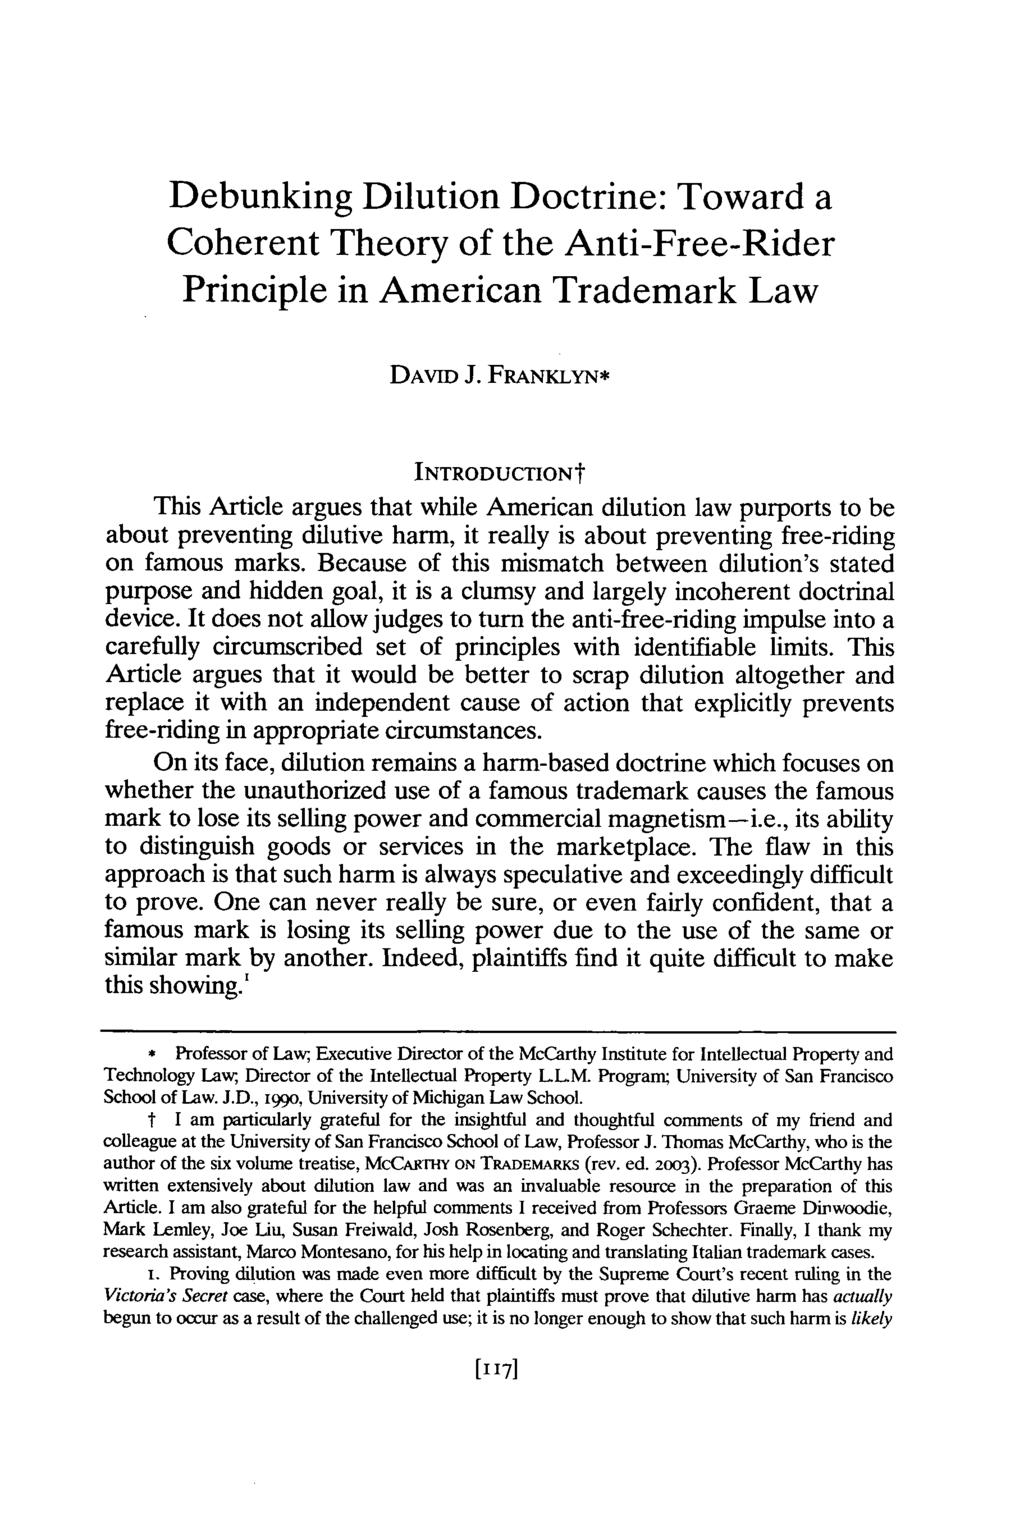 Debunking Dilution Doctrine: Toward a Coherent Theory of the Anti-Free-Rider Principle in American Trademark Law DAVID J.